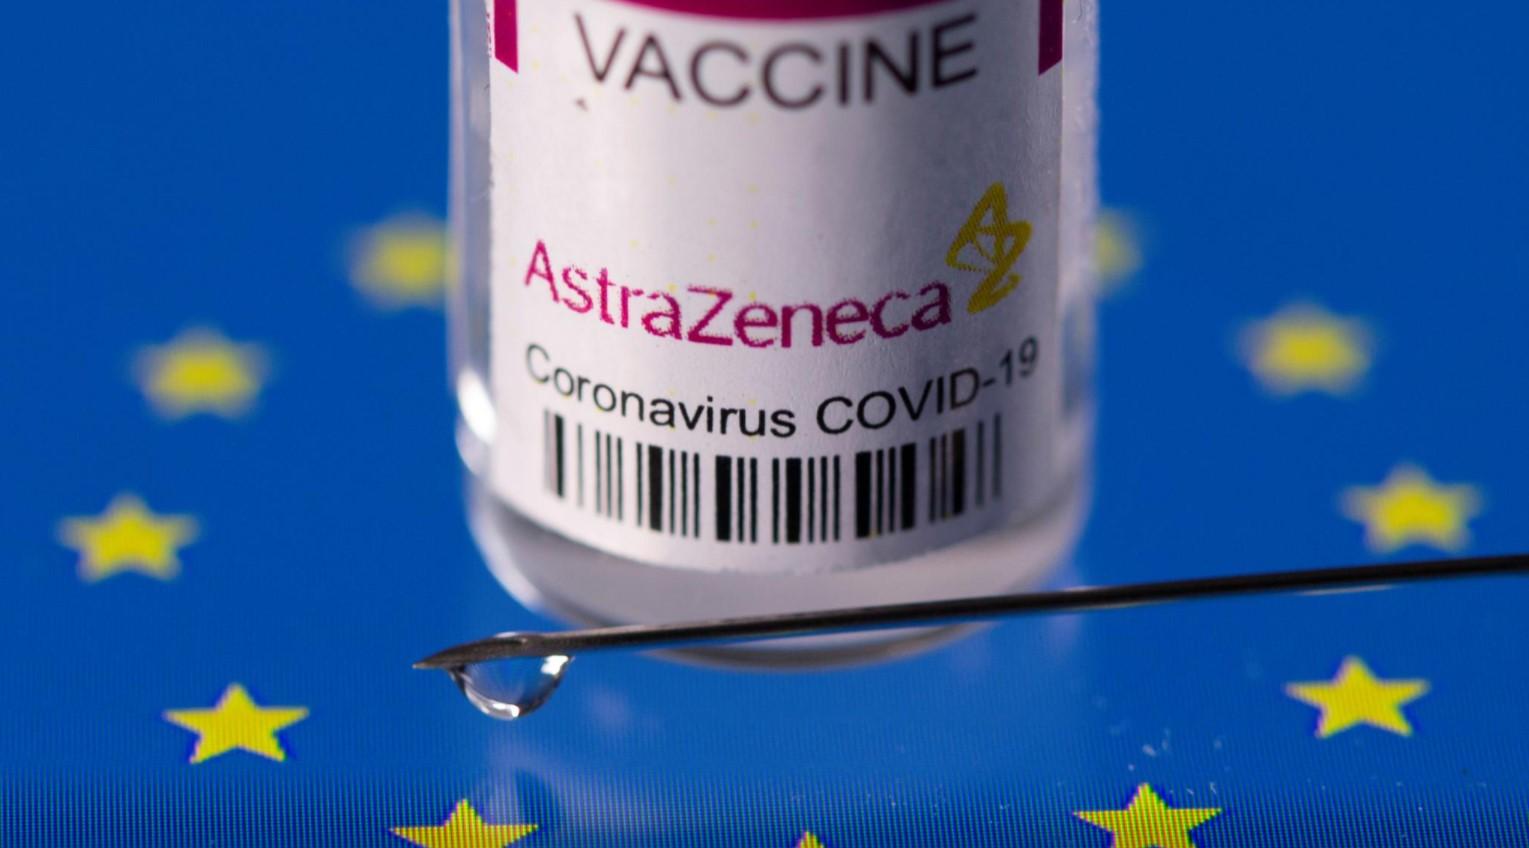 Vial labelled "AstraZeneca coronavirus disease (COVID-19) vaccine" placed on displayed EU flag is seen in this illustration picture taken March 24, 2021. - Avaz